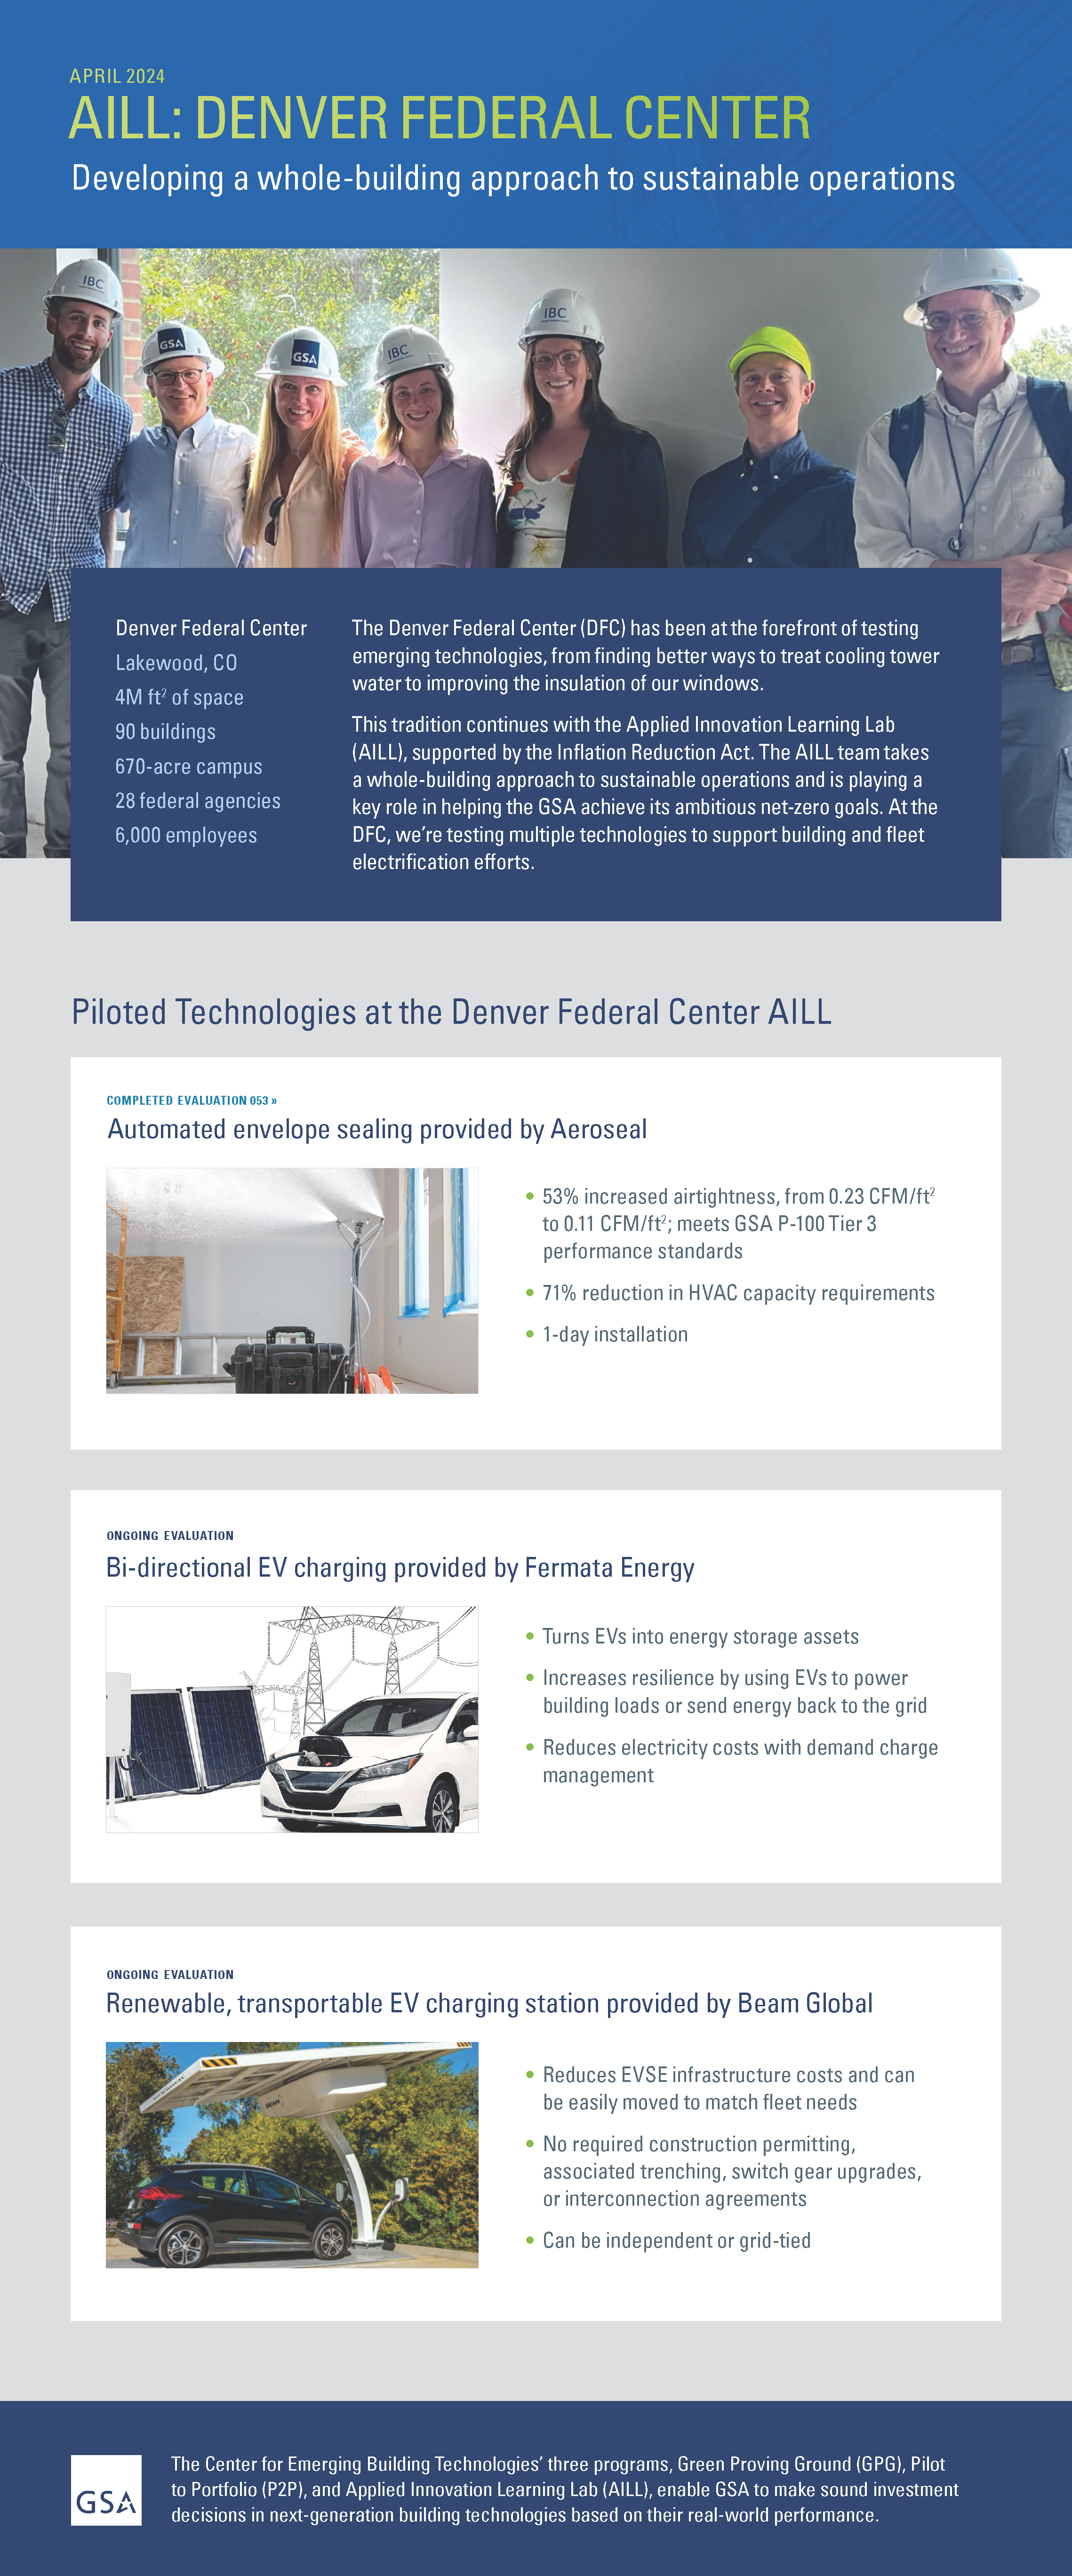 Download a PDF version of the full-size AILL: Denver Federal Center infographic.